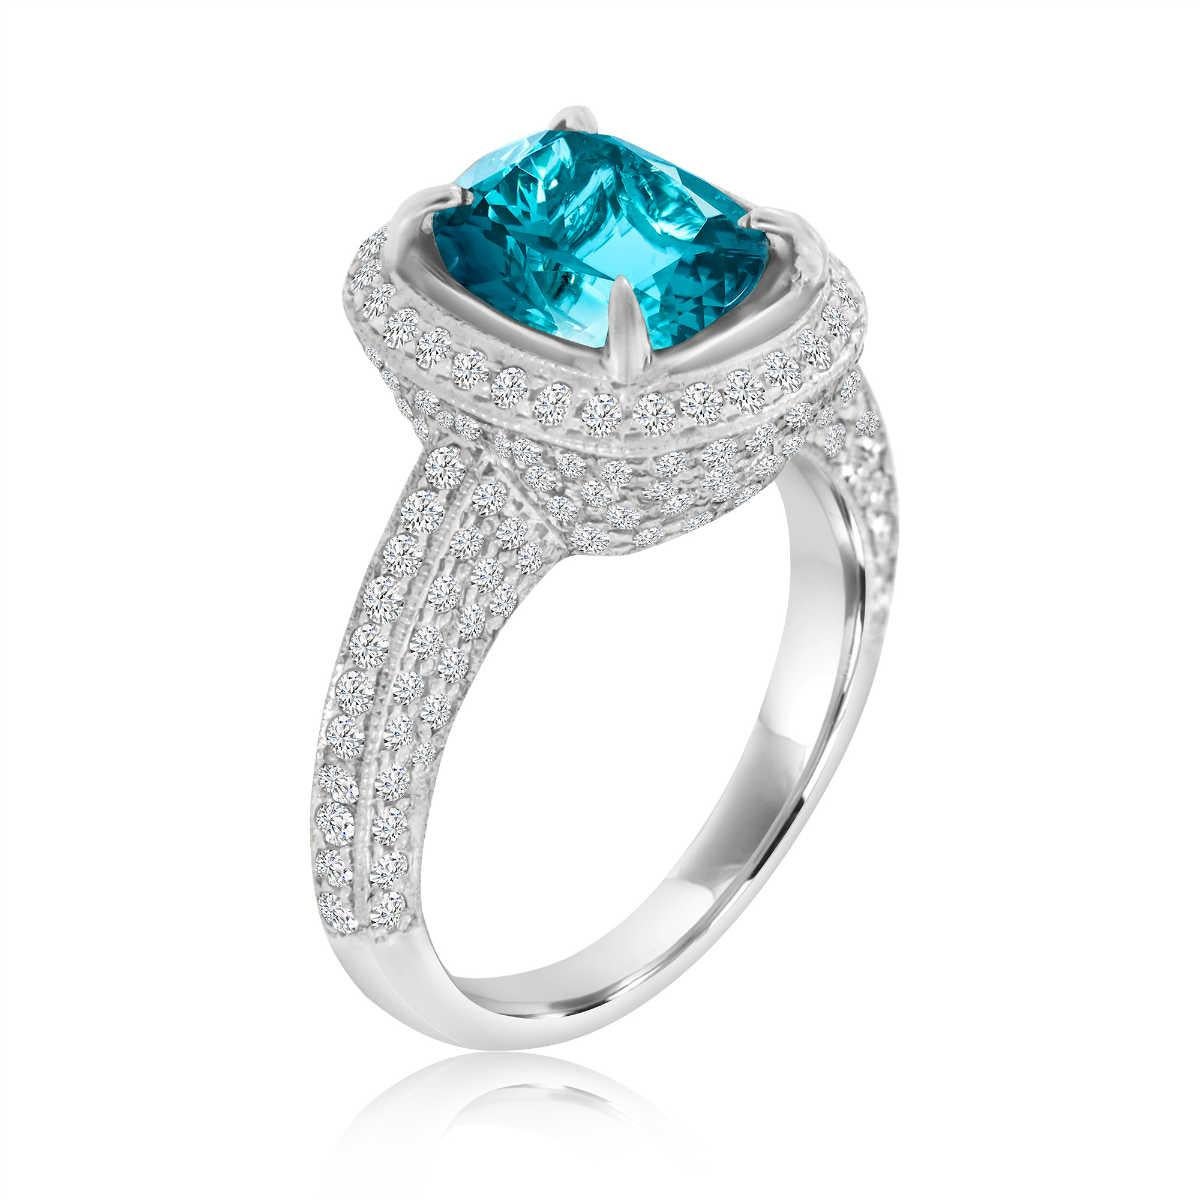 This Pre-Owned Red Carpet stunning Platinum ring features a 4.38-carat cushion-shaped vibrant Blue Zircon encircled by a halo of brilliant round diamonds. A pave' set of dazzling diamonds covering the vintage-designed crown and along the ring's